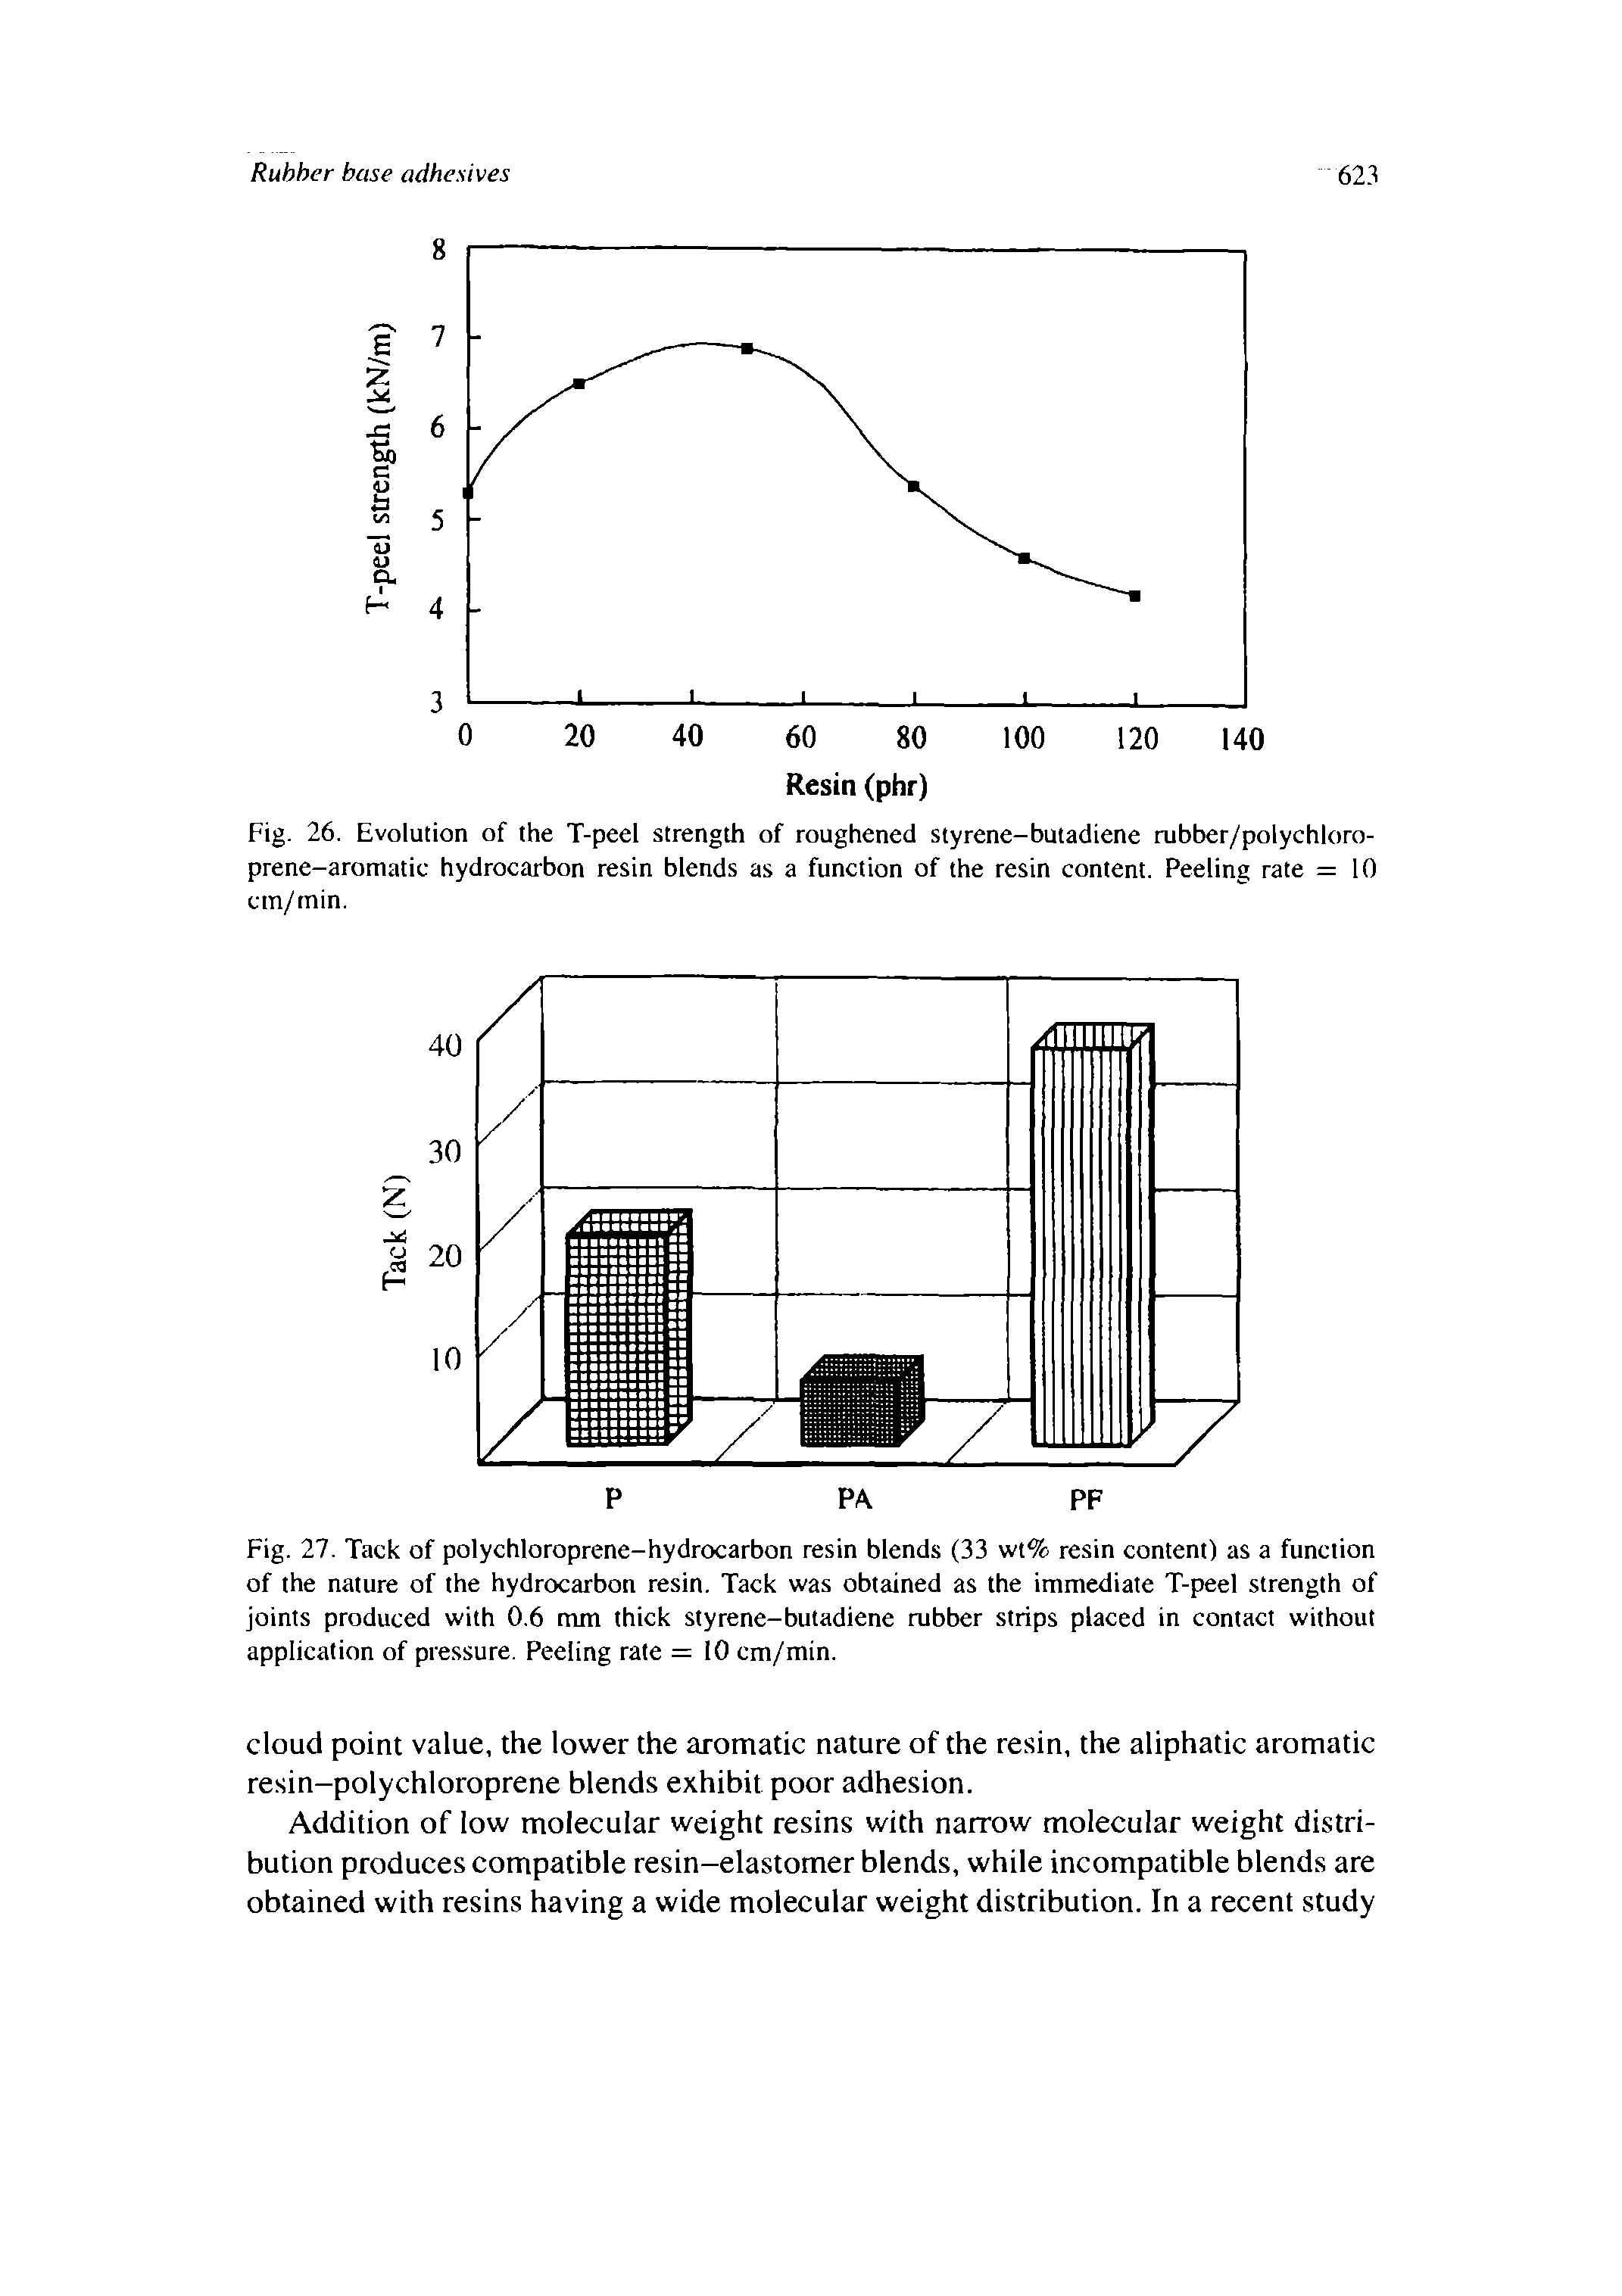 Fig. 26. Evolution of the T-peel strength of roughened styrene-butadiene rubber/polychloro-prene-aromatic hydrocarbon resin blends as a function of the resin content. Peeling rate = 10 cm/tnin.